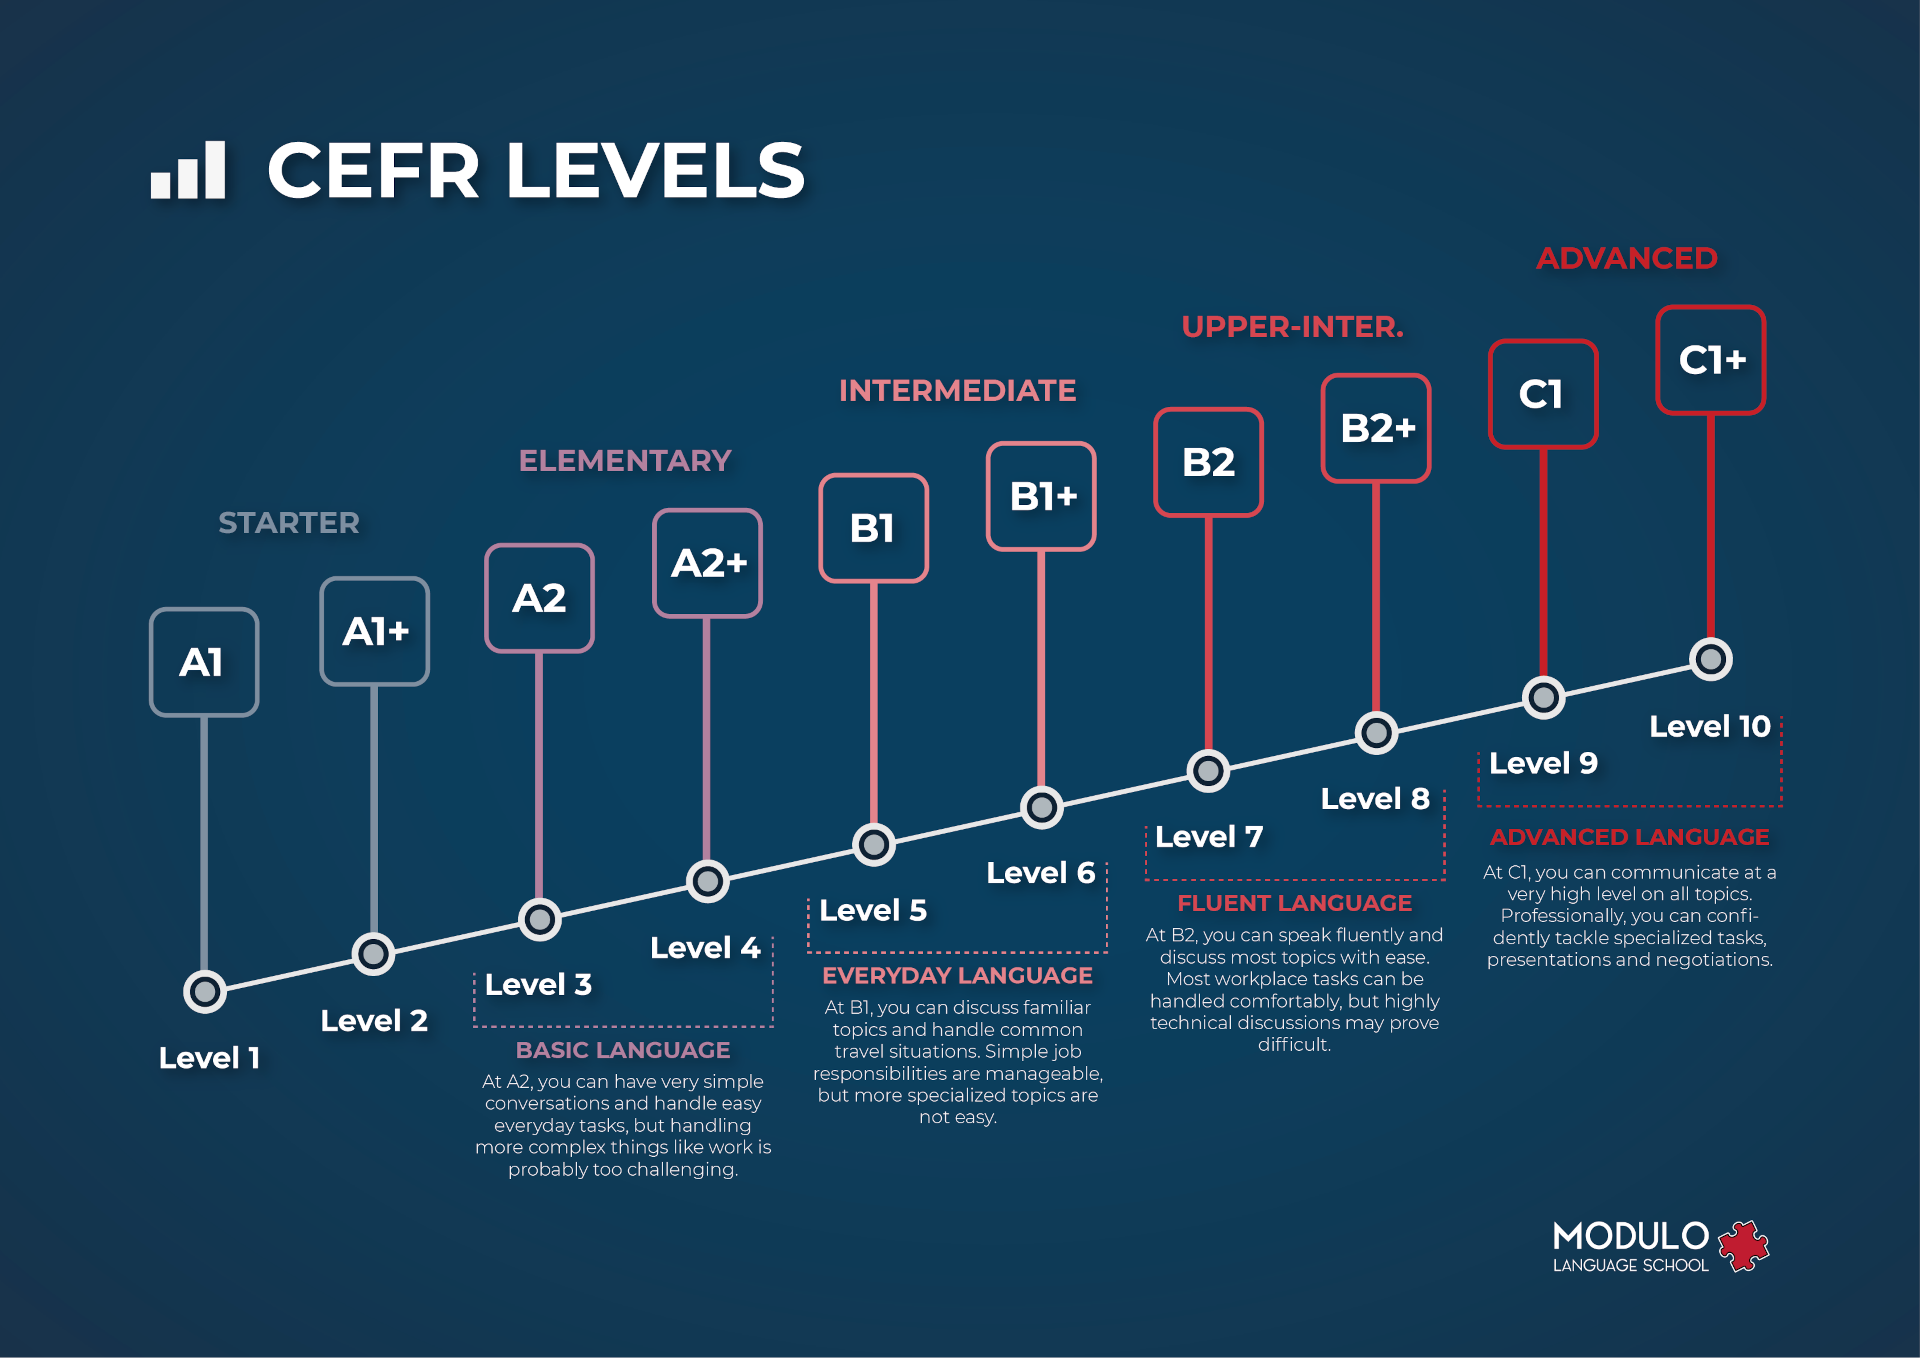 modulo-learn-about-the-cefr-levels-you-ll-be-assigned